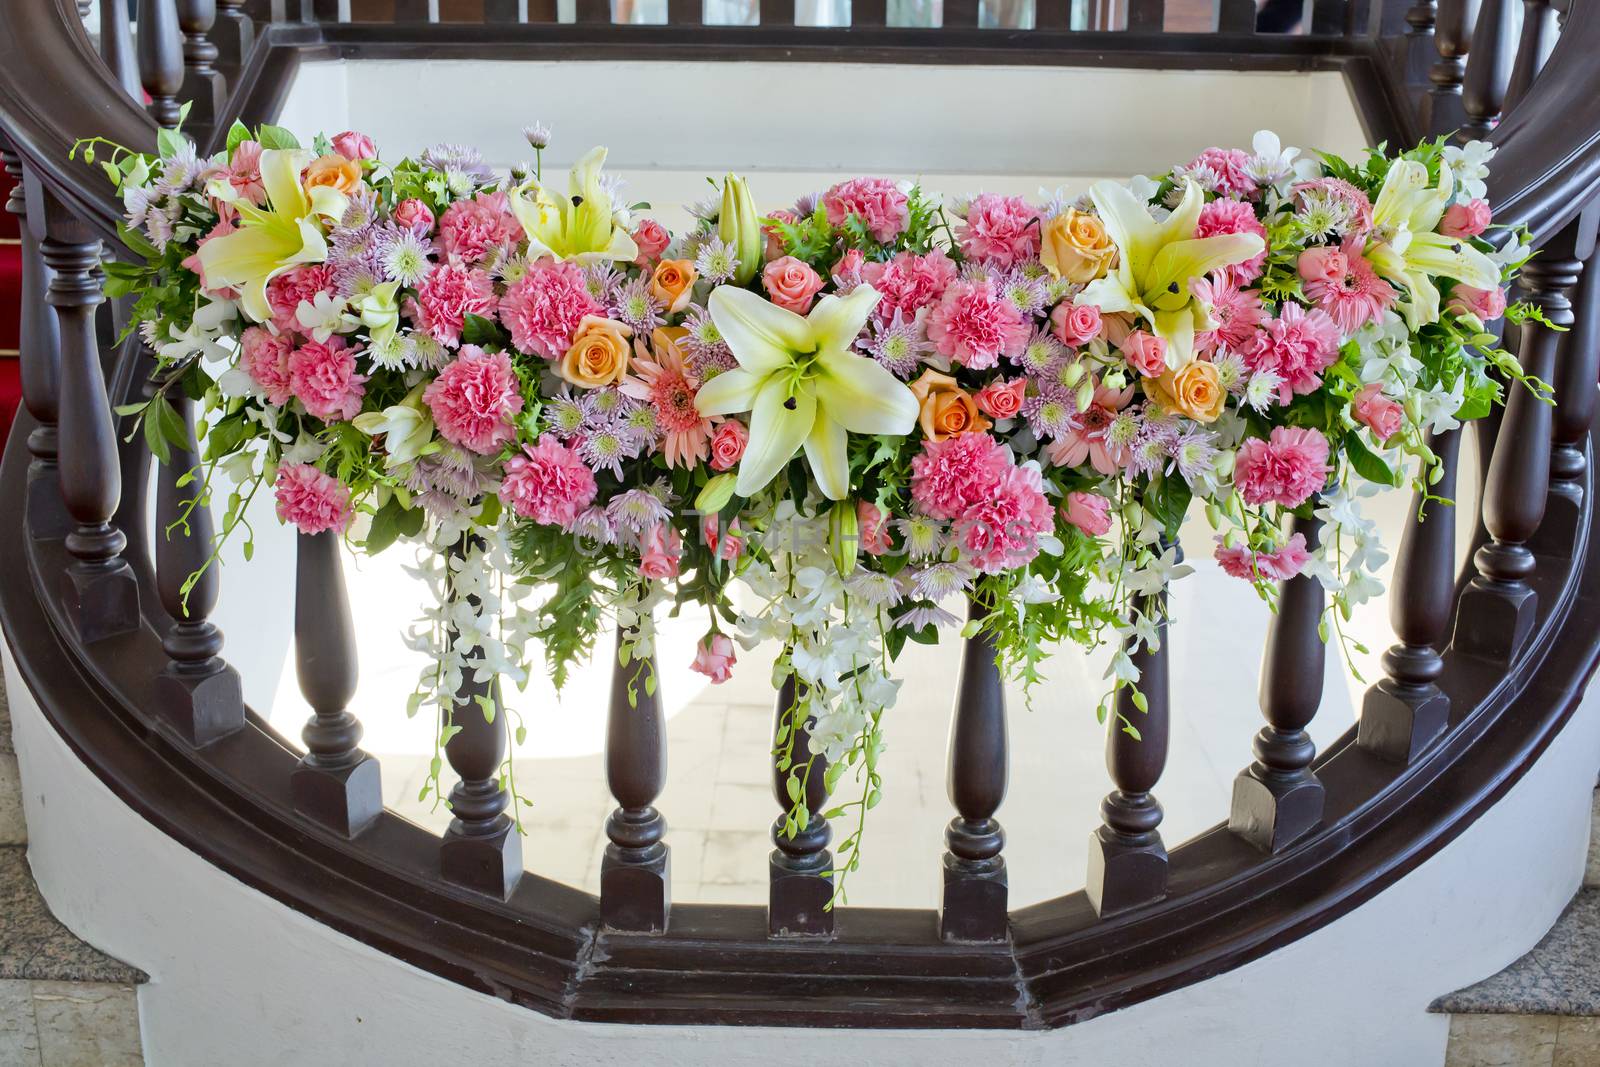 floral decorate in handrail of stairs at the wedding